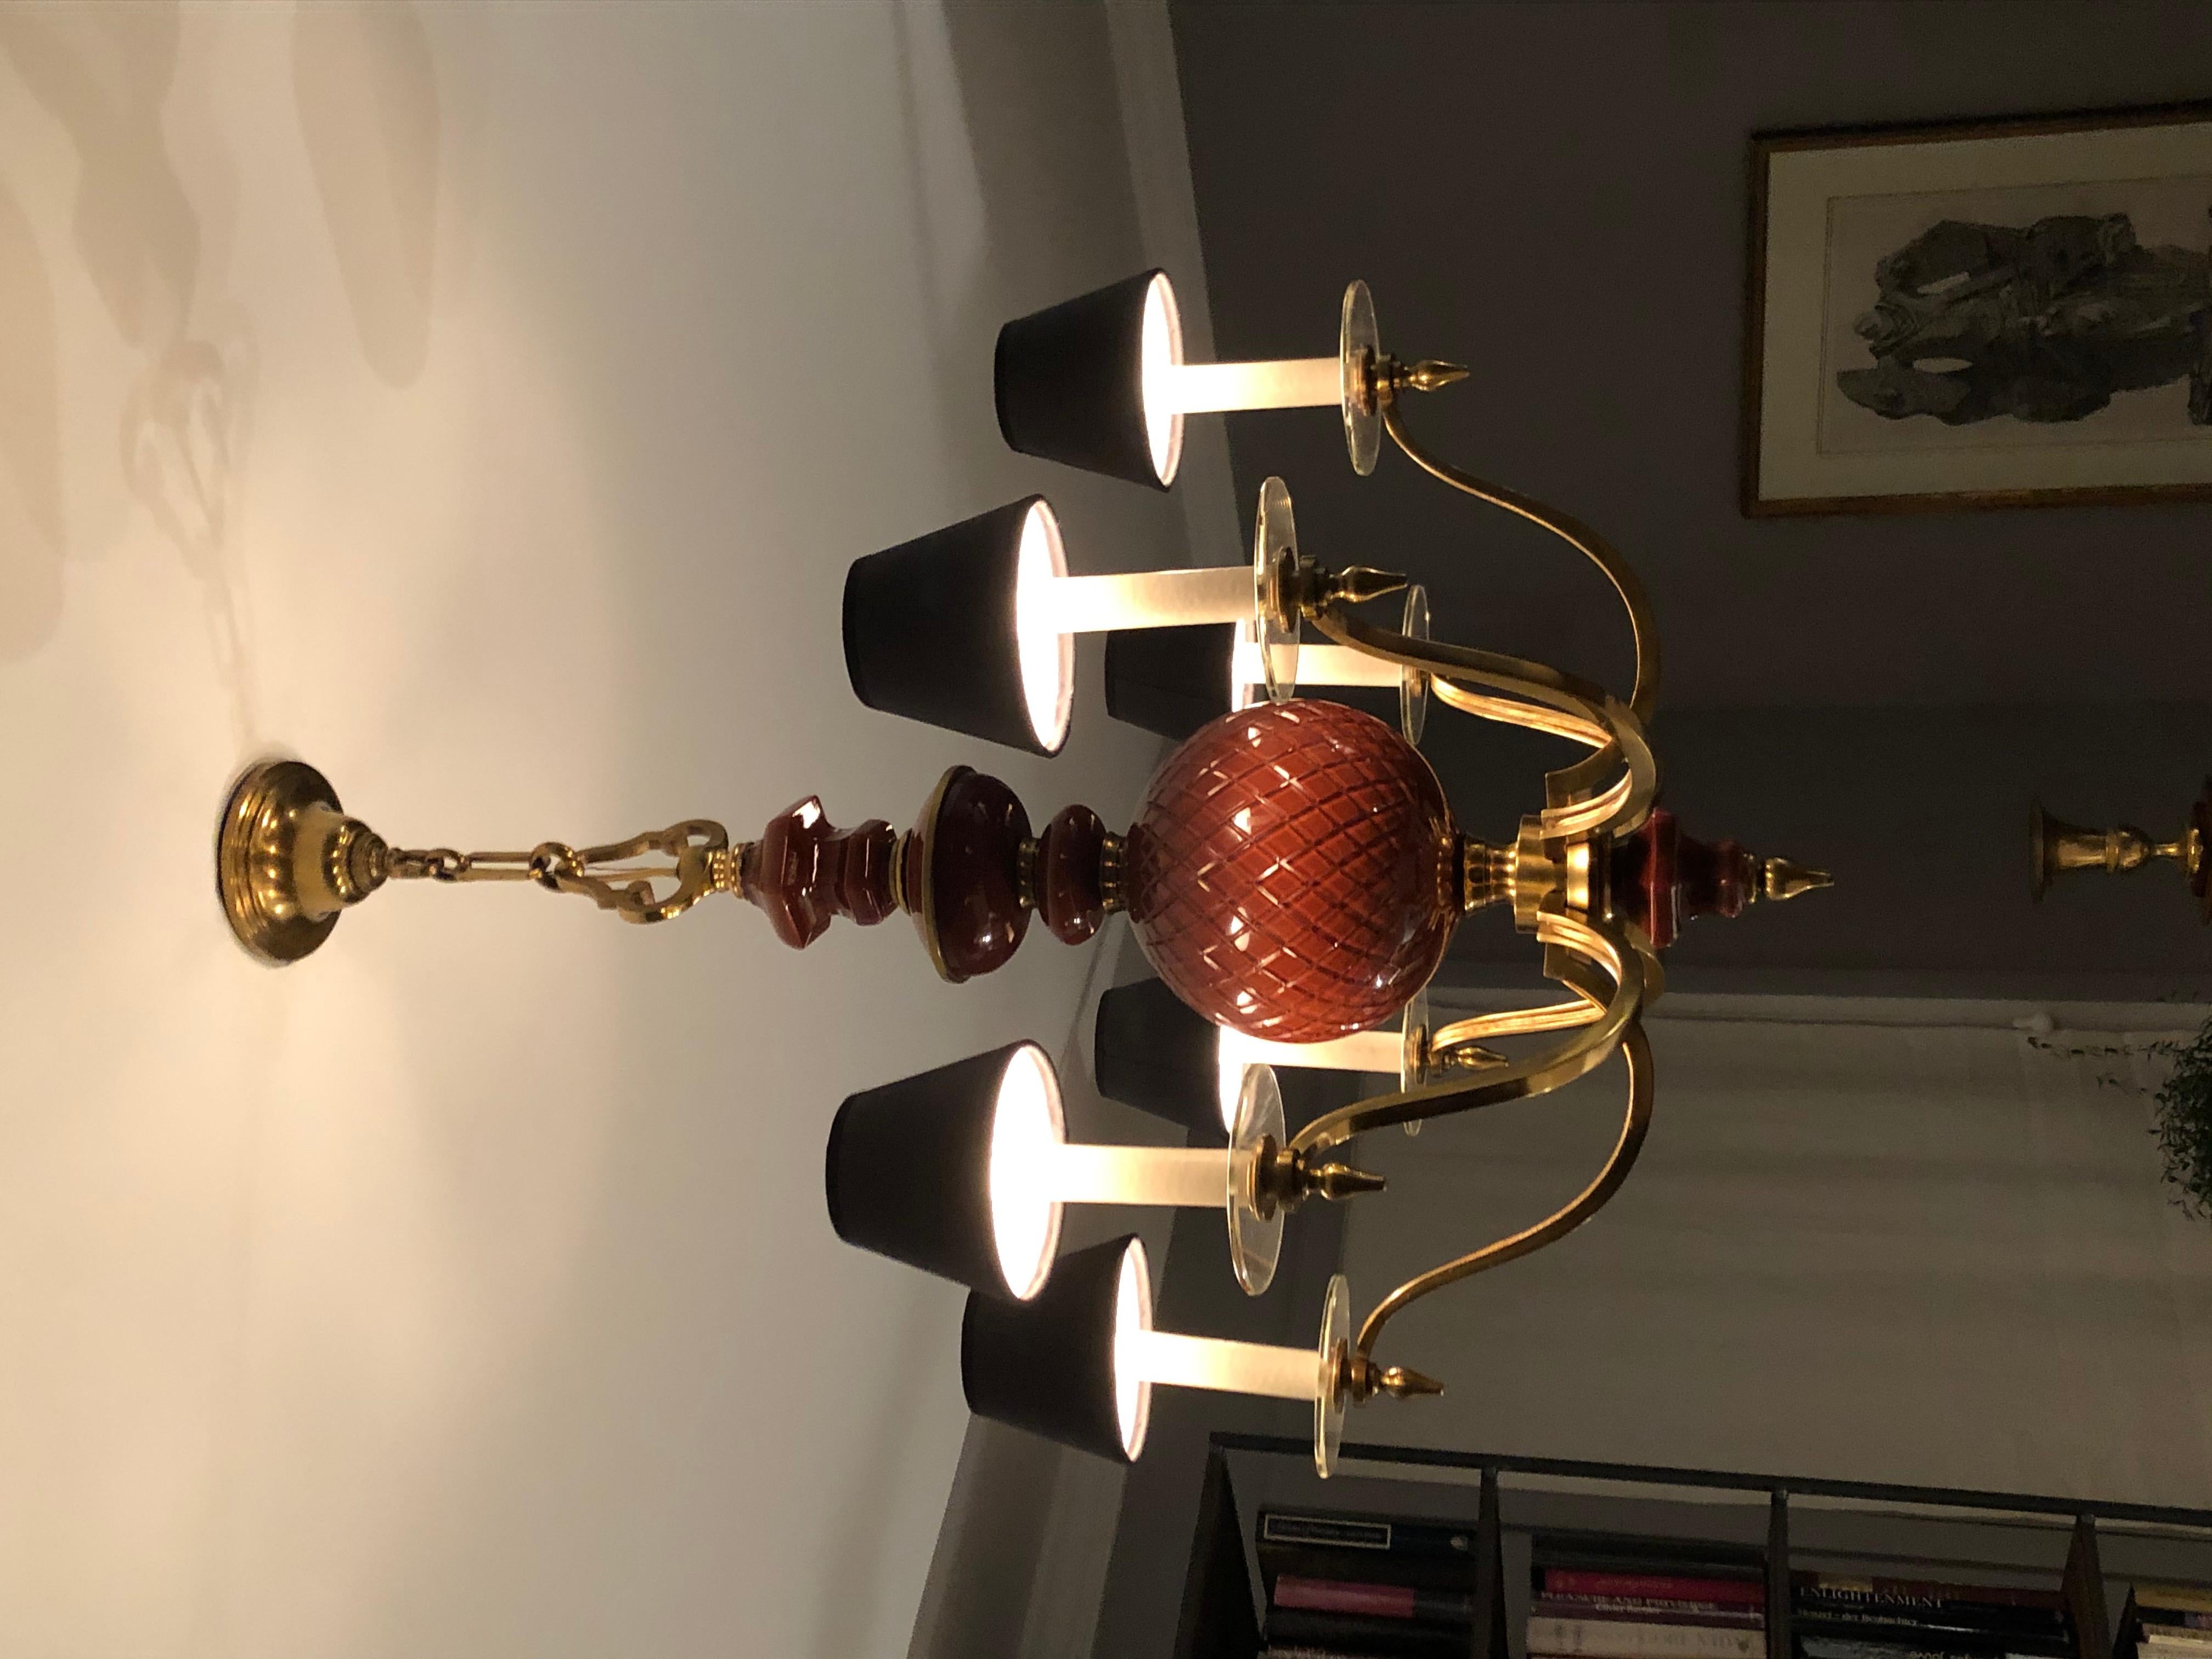 Our chandelier can be identified as Baguès, circa 1950, based on a similar model published in the magazine Plasir de France that very year. Stylistically, it represents what Baguès was, and remains, best known for, namely, modern interpretations of